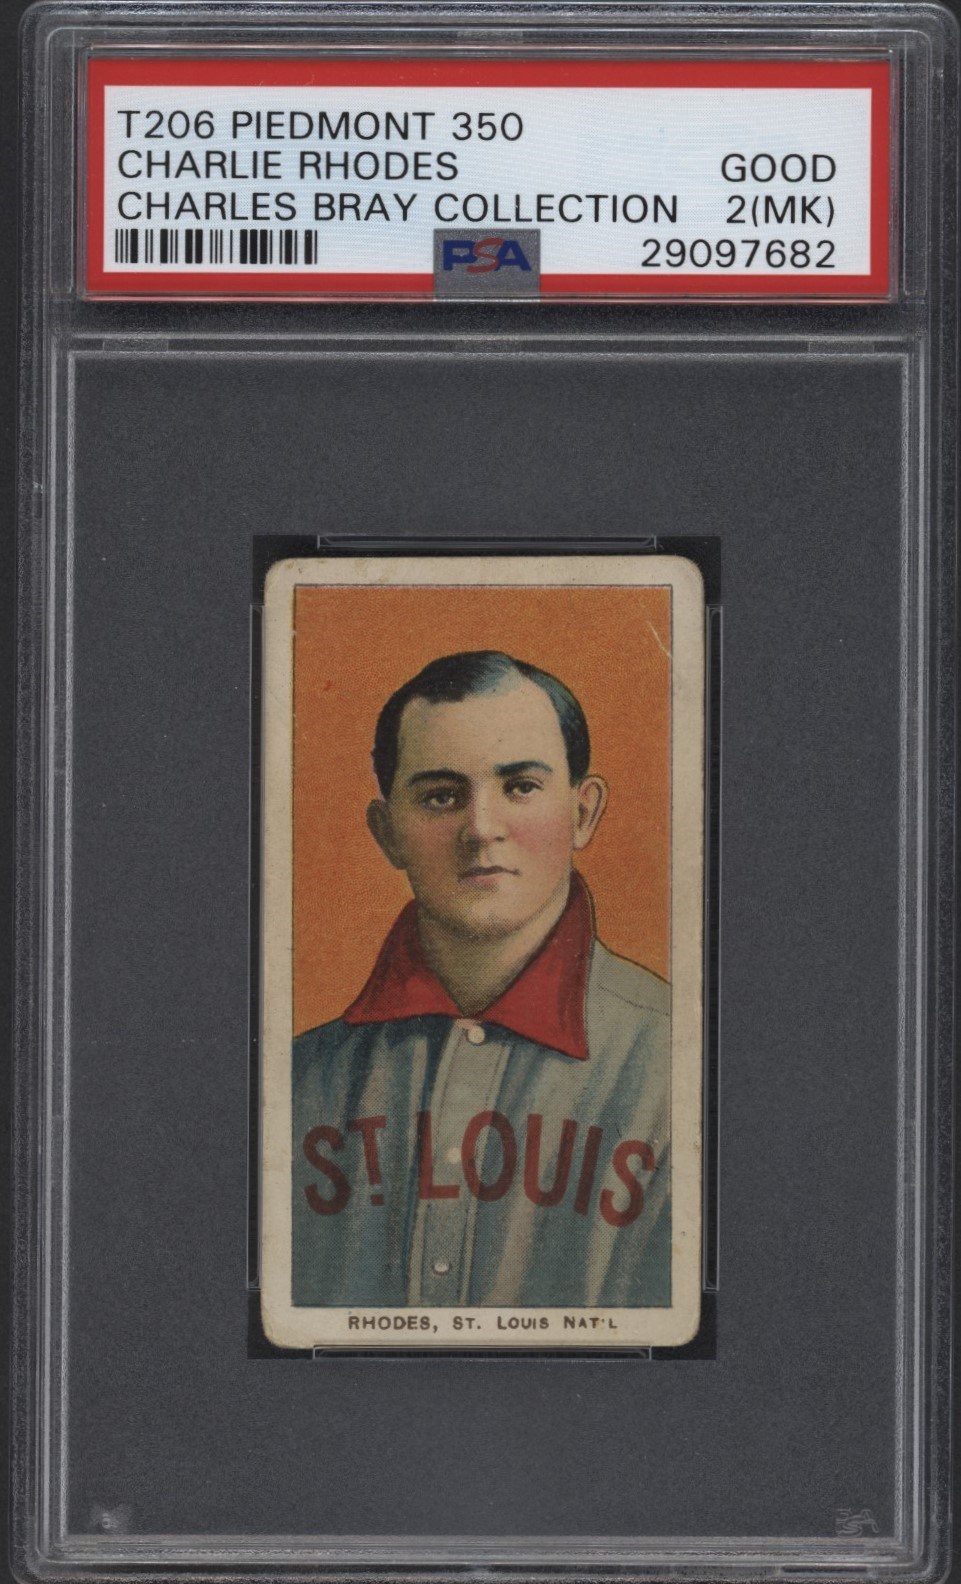 Baseball and Trading Cards - T206 Piedmont 350 Charlie Rhodes PSA 2 From the Charles Bray Collection